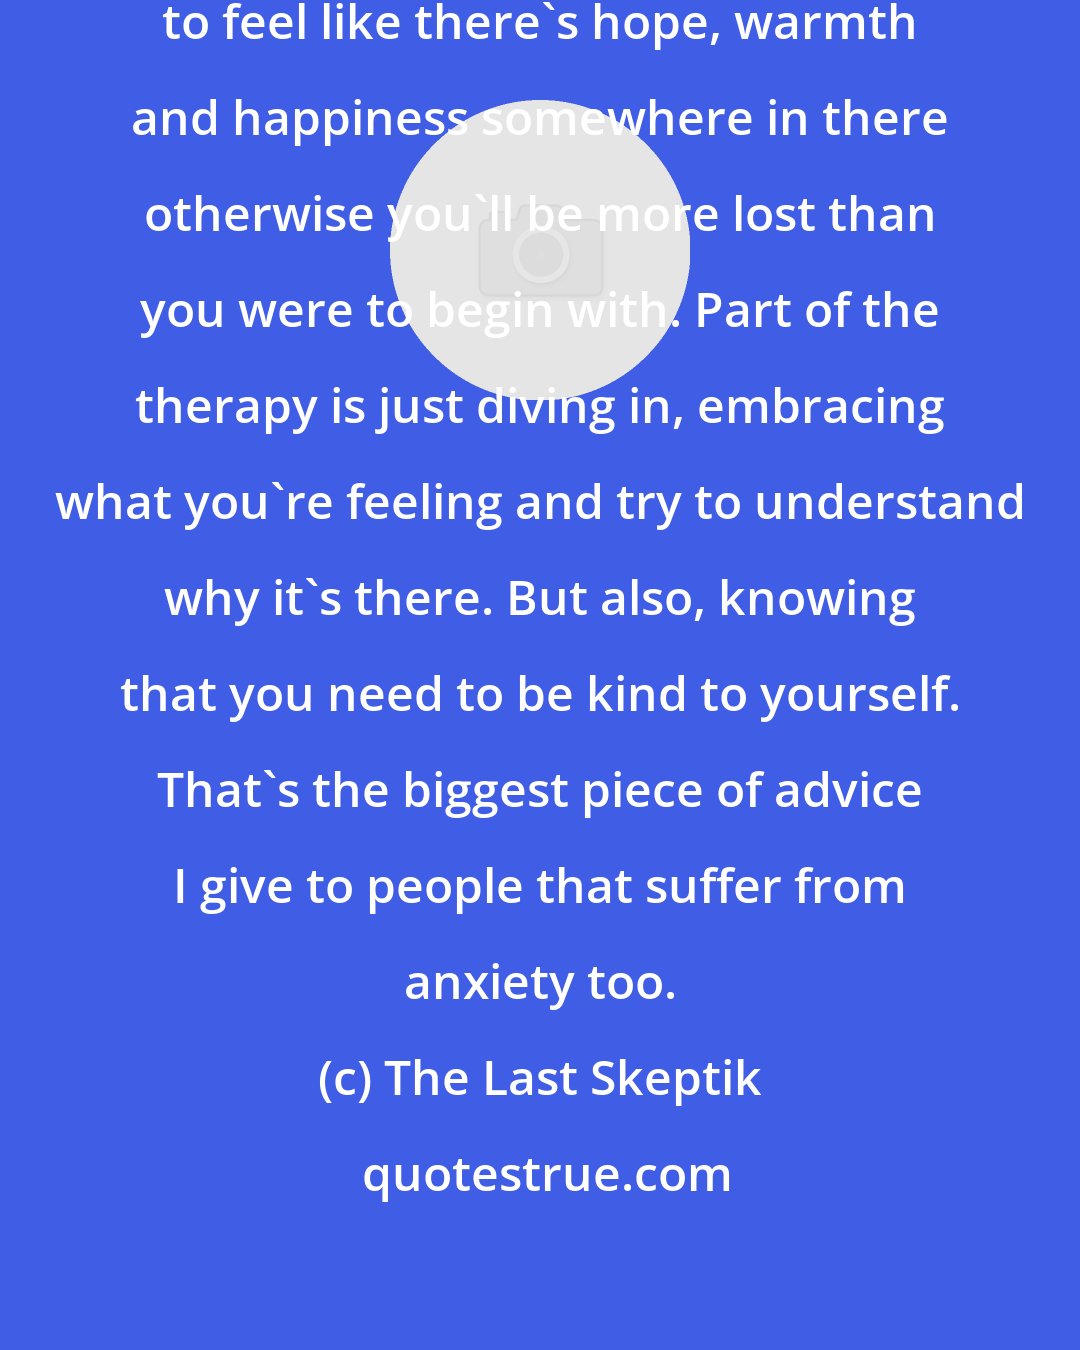 The Last Skeptik: Part of therapy is the hope. You need to feel like there's hope, warmth and happiness somewhere in there otherwise you'll be more lost than you were to begin with. Part of the therapy is just diving in, embracing what you're feeling and try to understand why it's there. But also, knowing that you need to be kind to yourself. That's the biggest piece of advice I give to people that suffer from anxiety too.